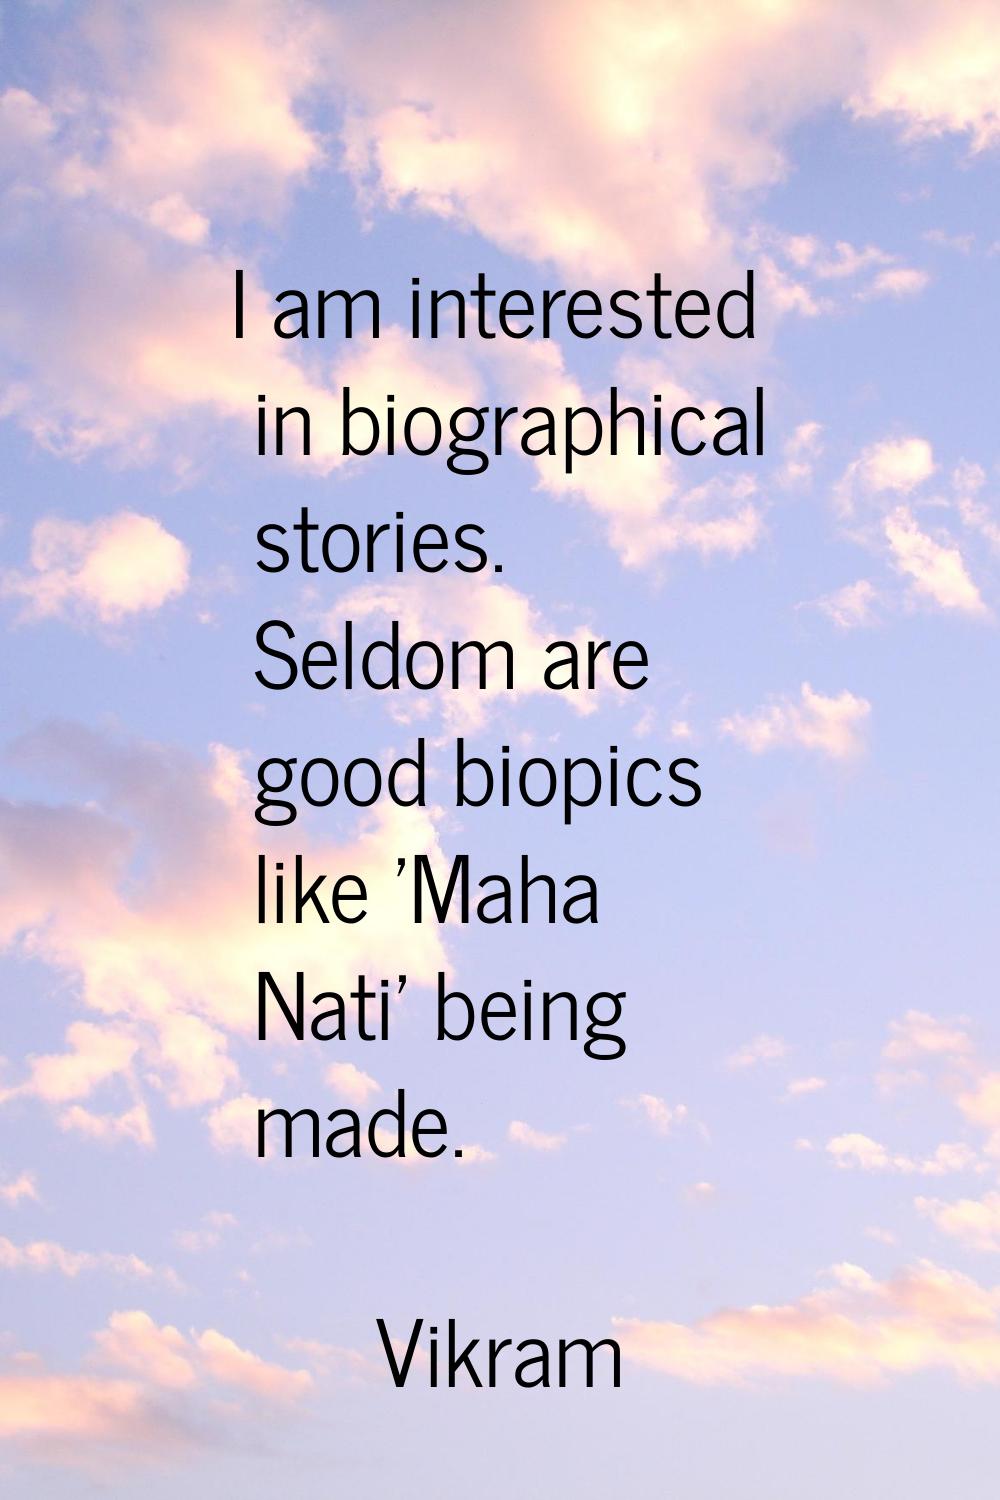 I am interested in biographical stories. Seldom are good biopics like 'Maha Nati' being made.